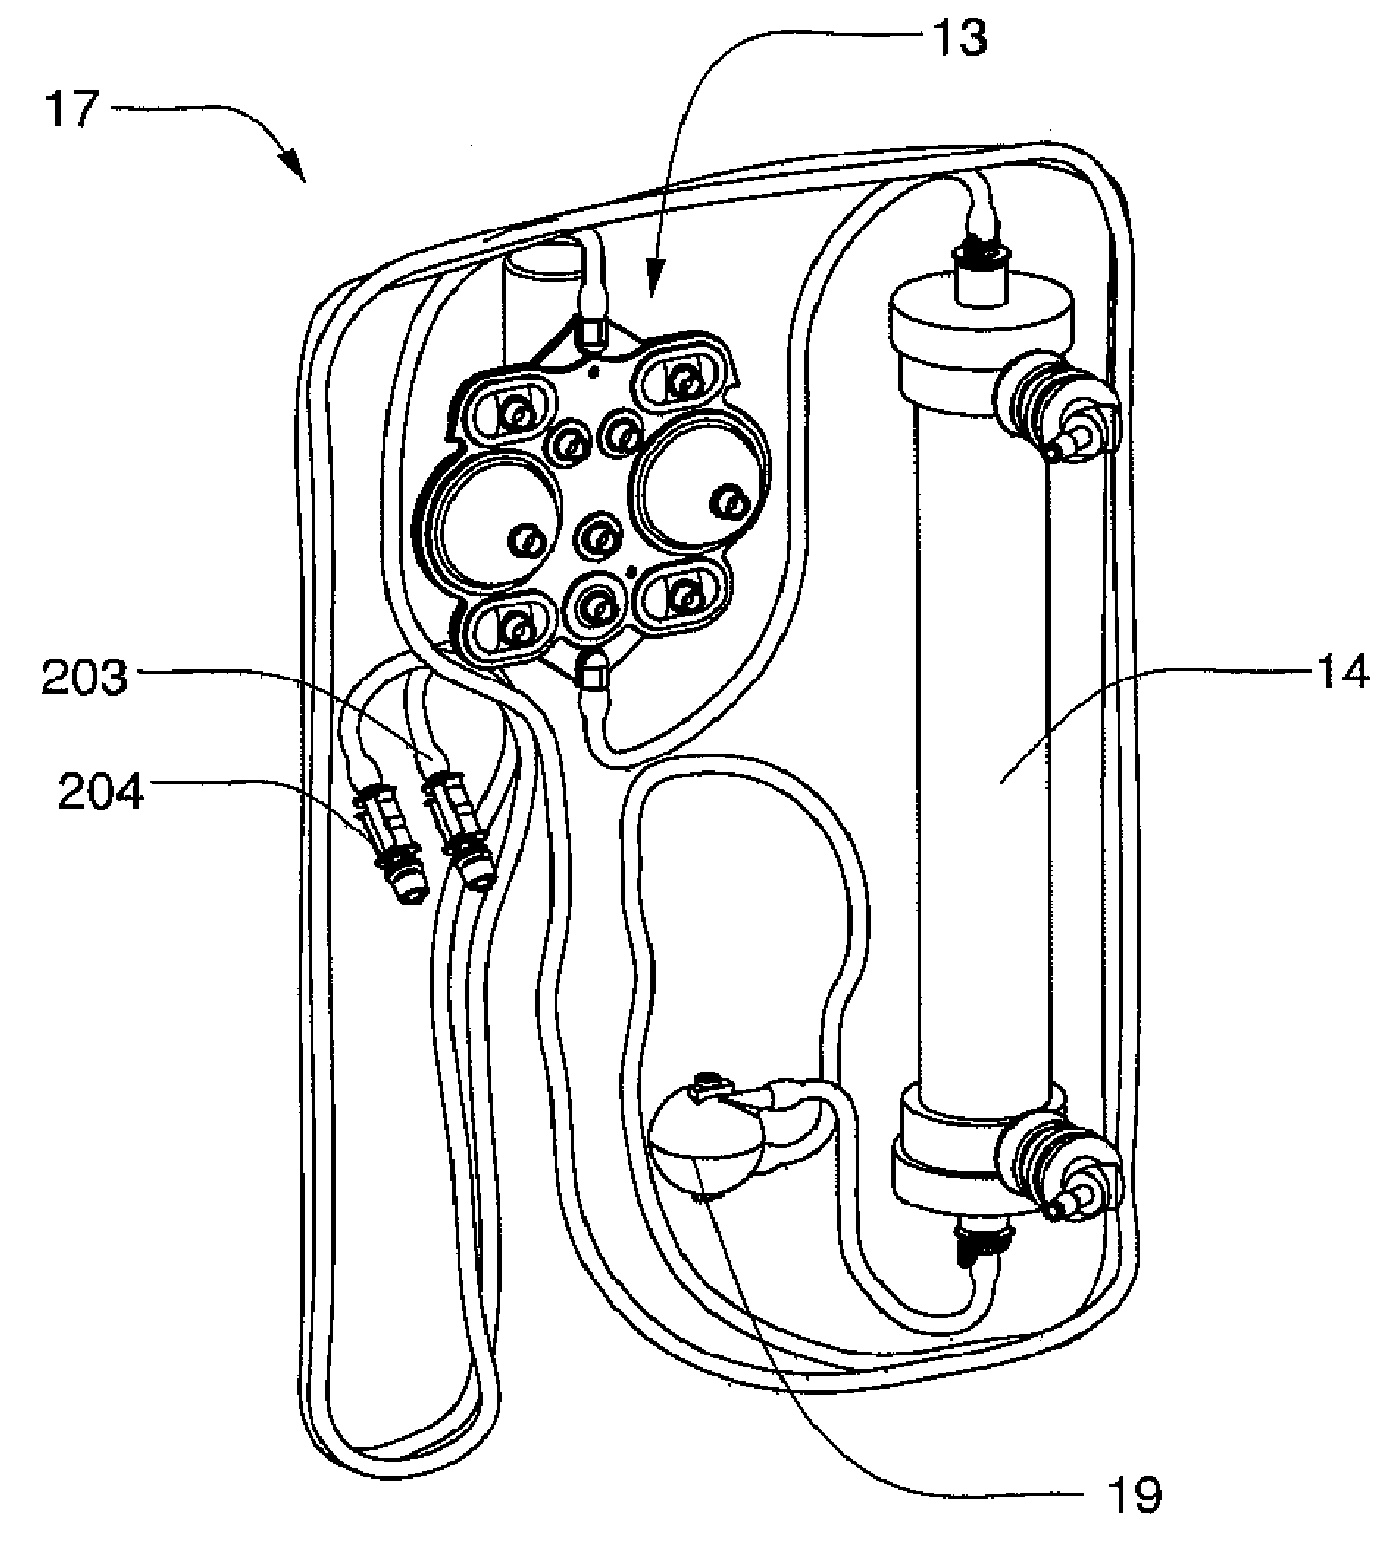 Blood circuit assembly for a hemodialysis system